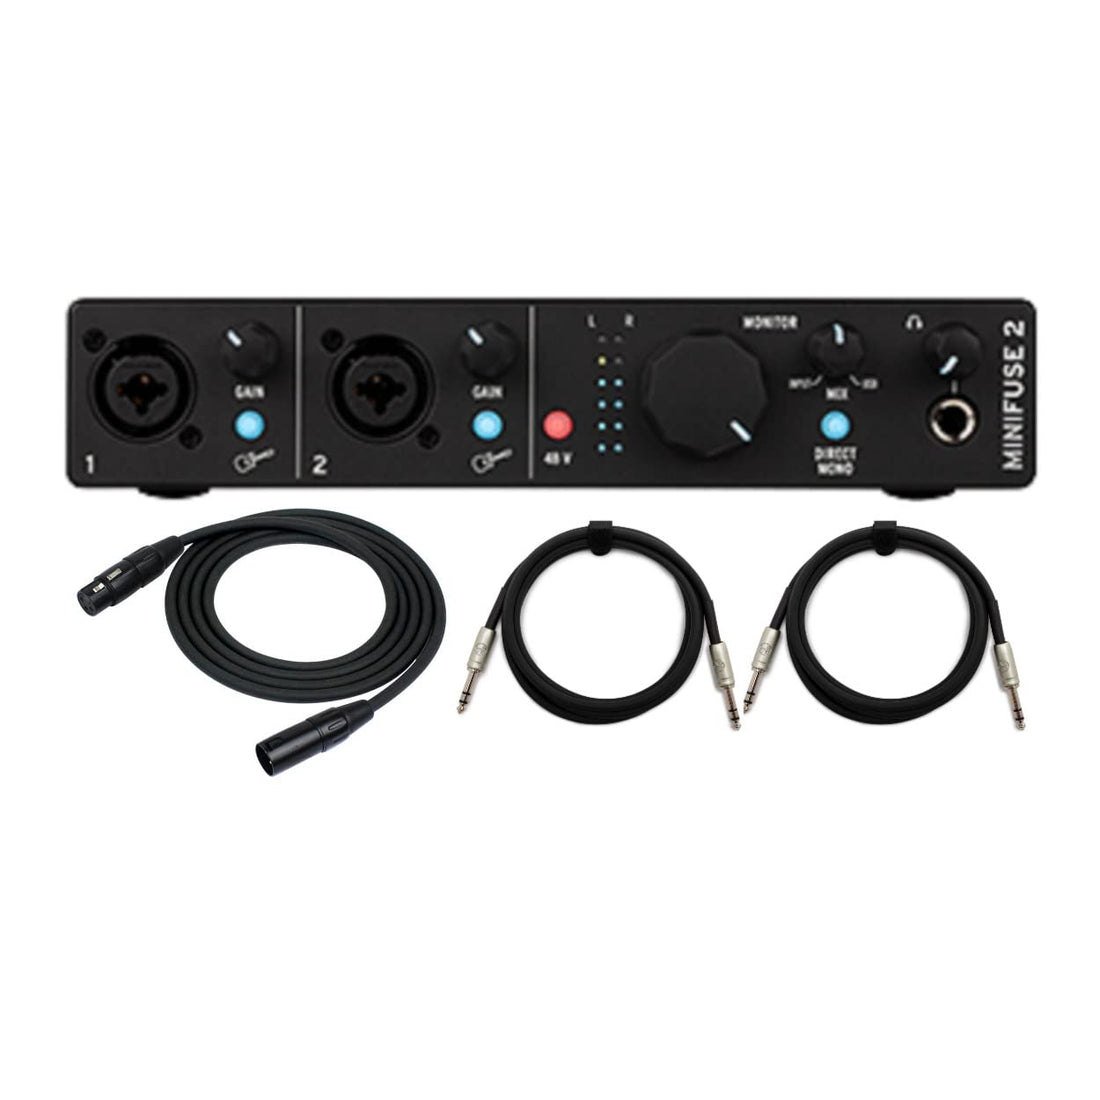 Arturia MiniFuse 2 USB-C Audio Interface Bundle with XLR and 1/4-Inch TRS Cables (Black) (4 Items)